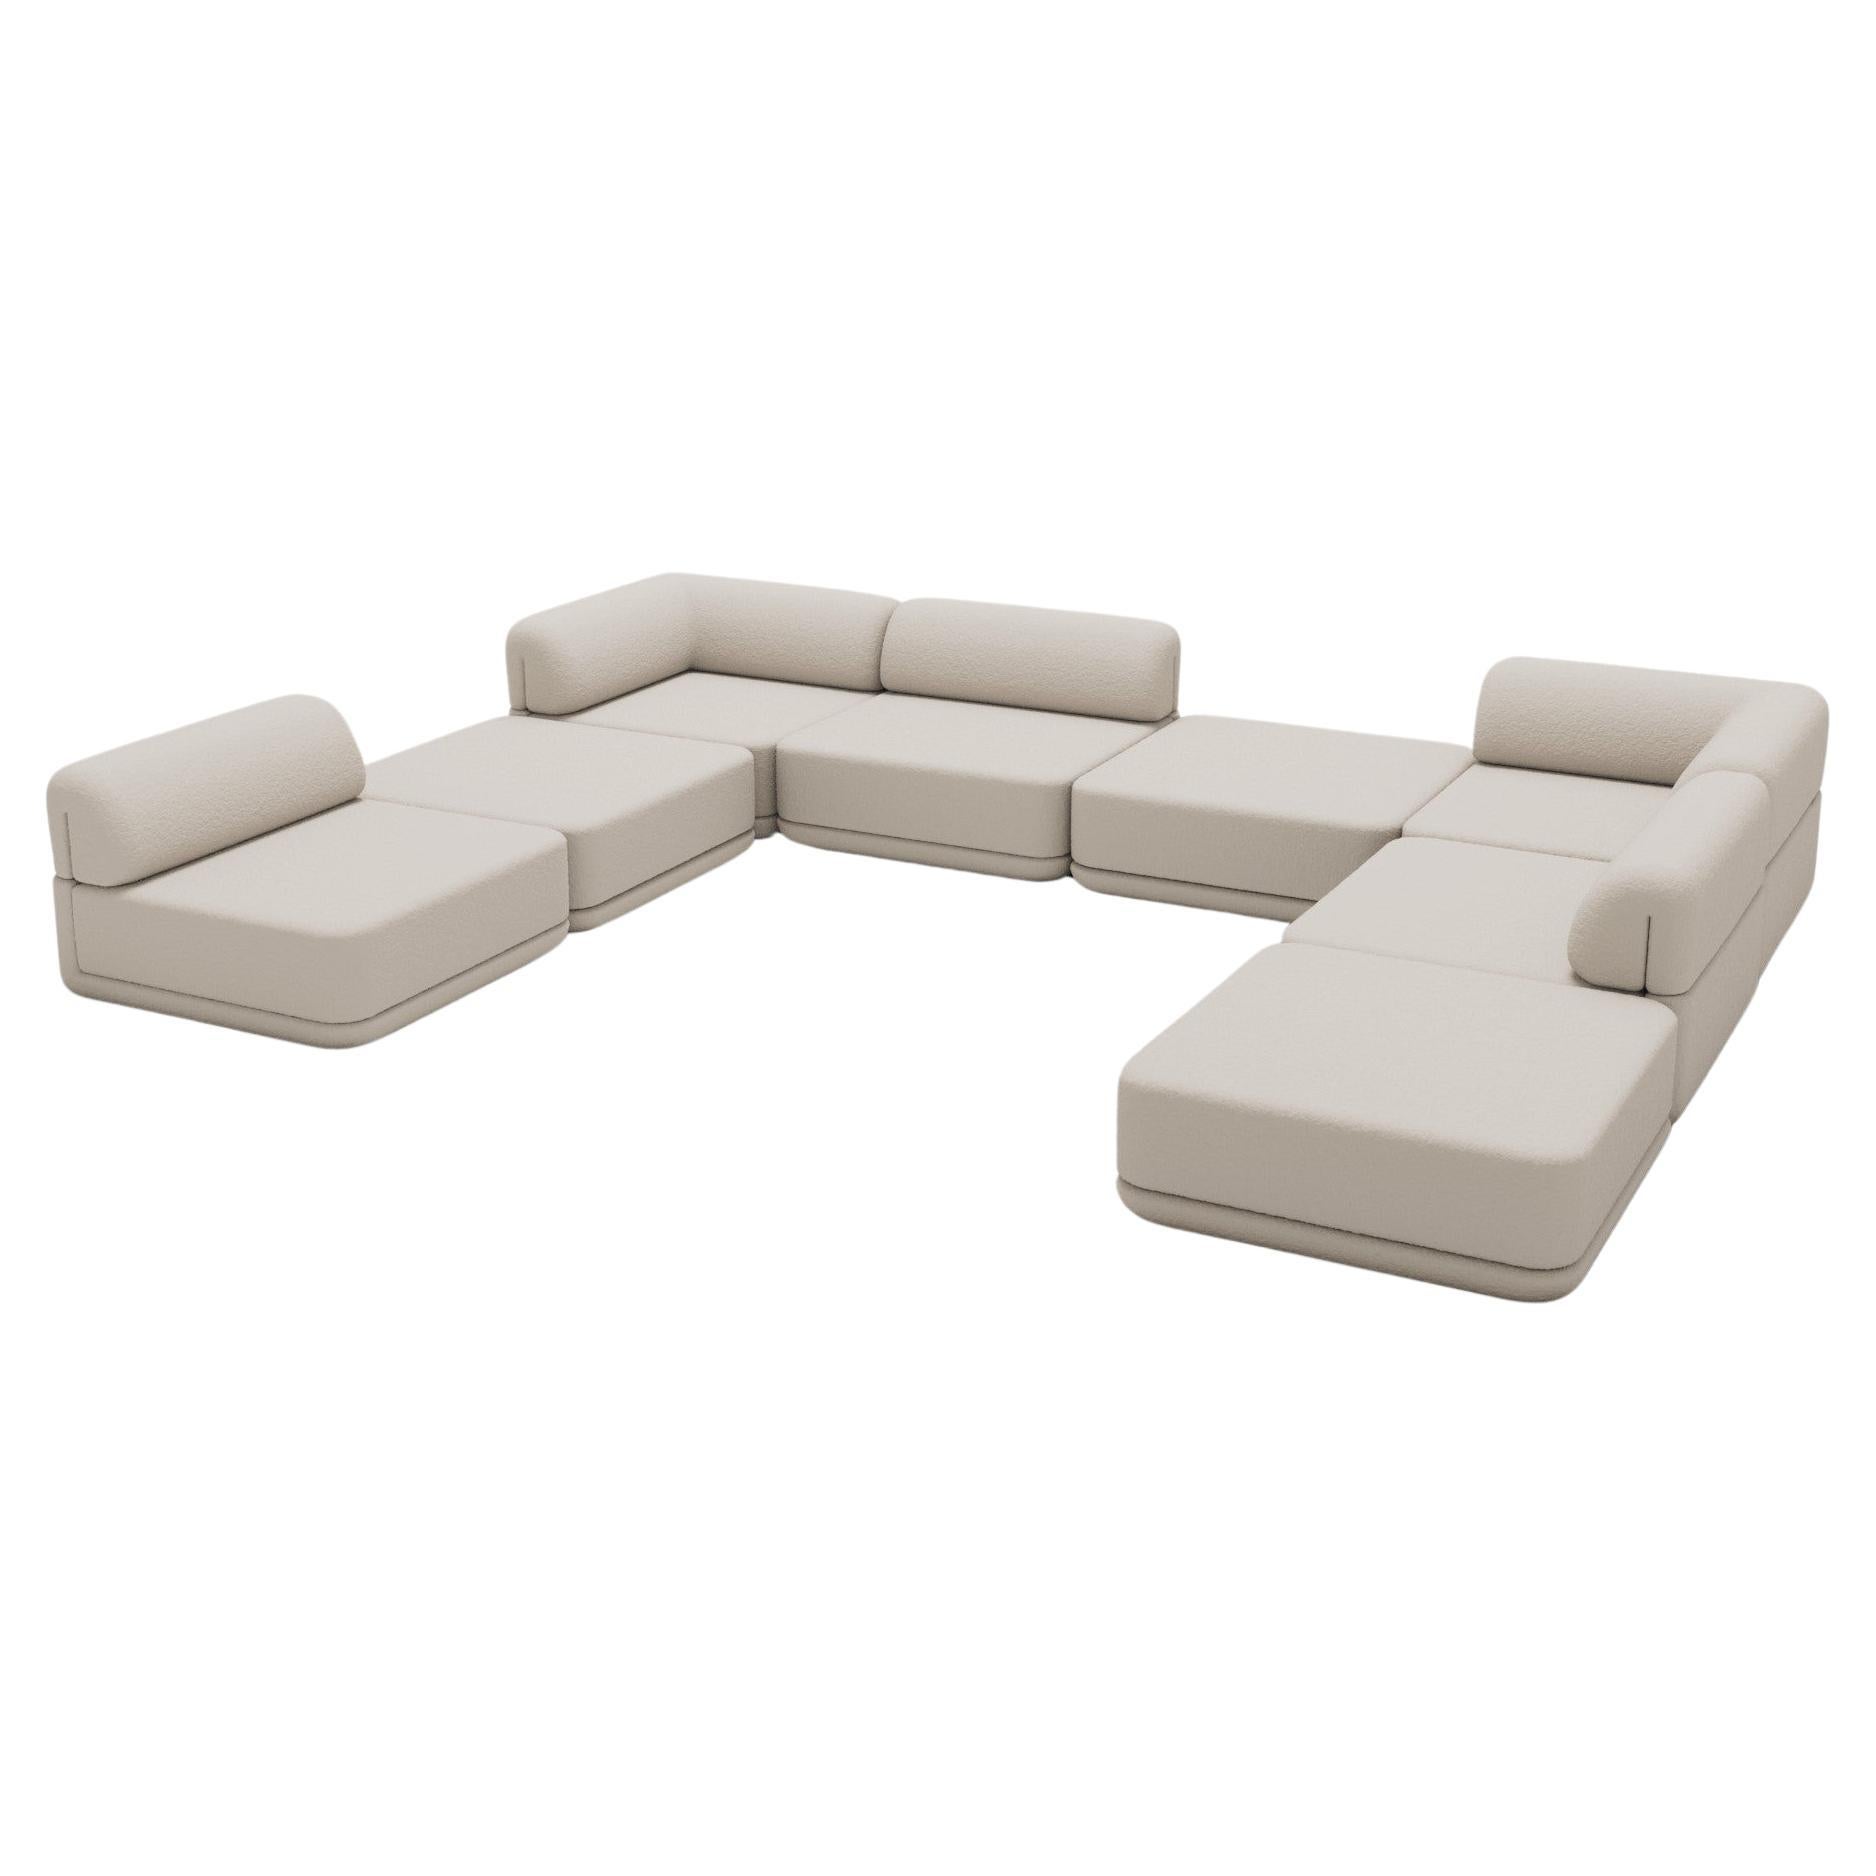 Corner Full Mix Sectional - Inspired by 70s Italian Luxury Furniture

Discover The Cube Sofa, where art meets adaptability. Its sculptural design and customizable comfort create endless possibilities for your living space. Make a statement, elevate